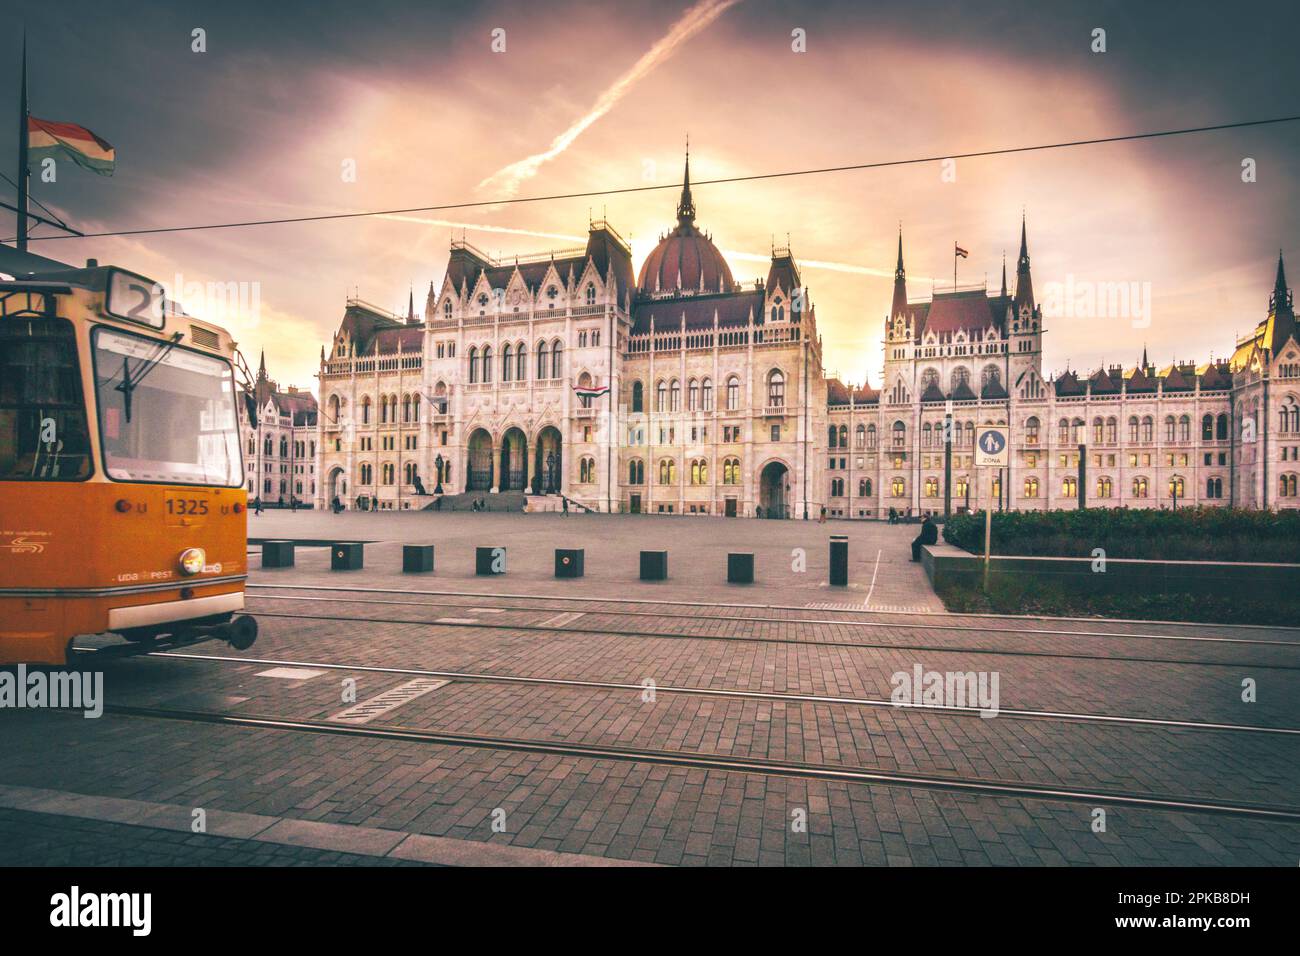 The Parliament in the city of Budapest, Hungary, magnificent historical building in the daytime Stock Photo